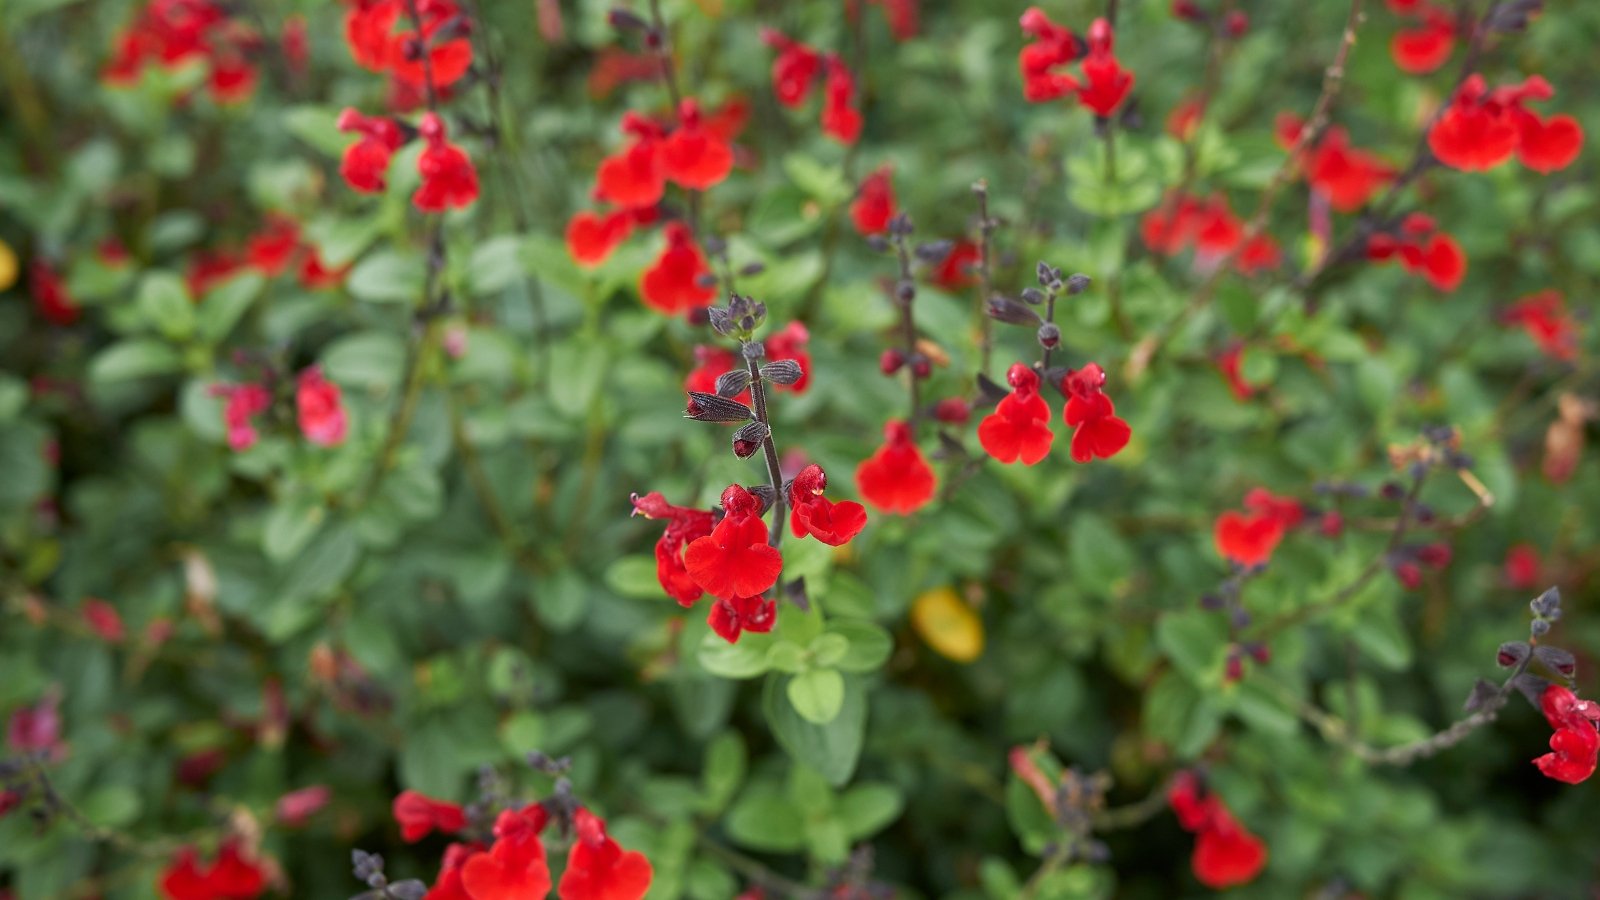 The Autumn Sage boasts slender, tubular flowers in vibrant hues of red, adorning aromatic foliage characterized by lance-shaped, gray-green leaves.